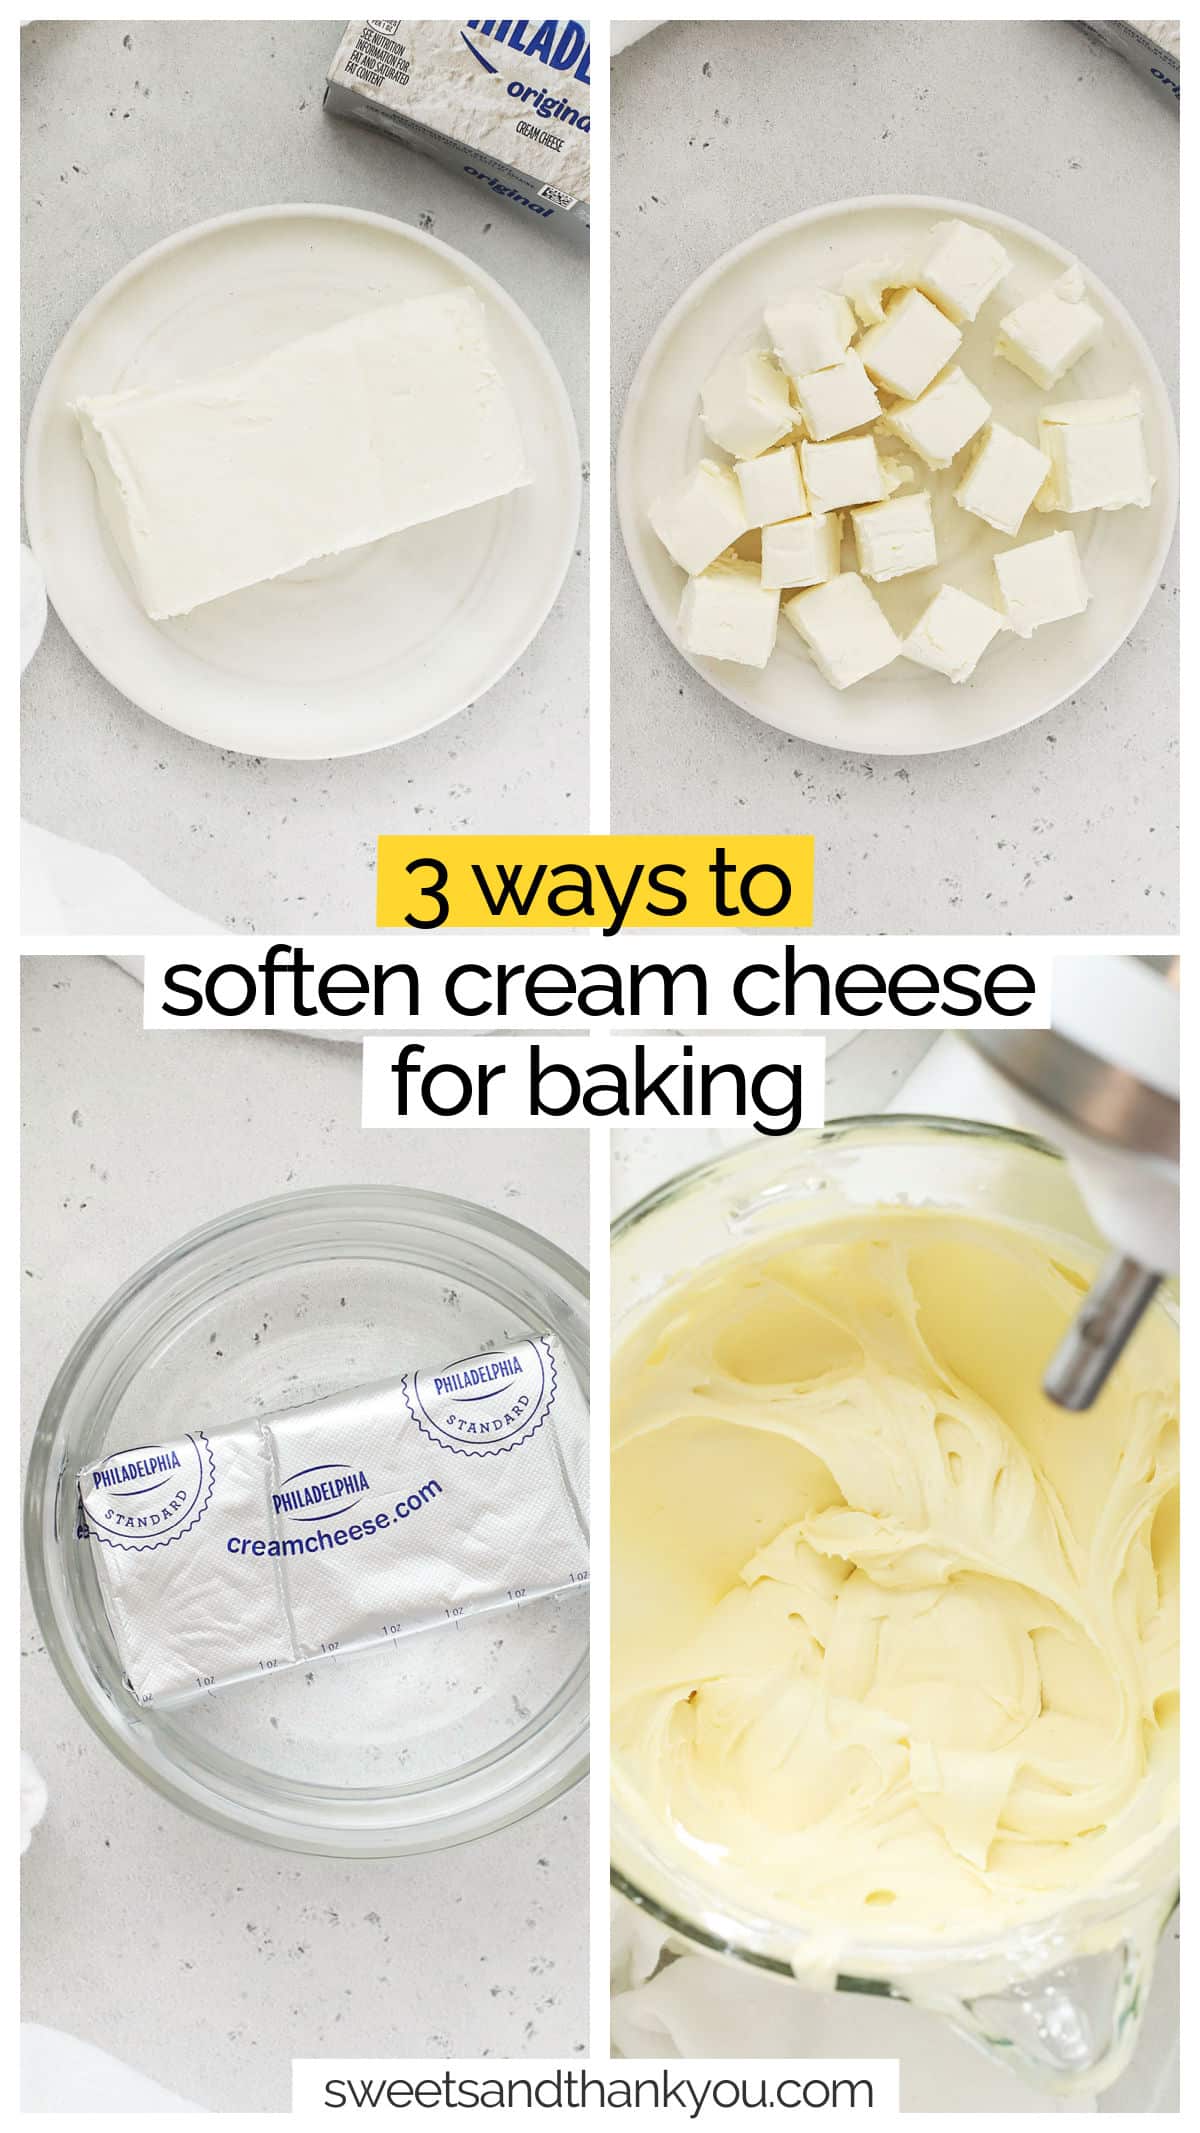 Softening cream cheese has never been easier! Learn 3 different tricks for softening cream cheese quickly. Perfect for making cheesecake, frosting, and more! We'll start with the easiest method (countertop), followed by cubing (faster), and then finish up with the fastest way to soften cream cheese (water method). With this quick baking tip, you'll be on your way to making cheesecake, frosting, and more in no time! 